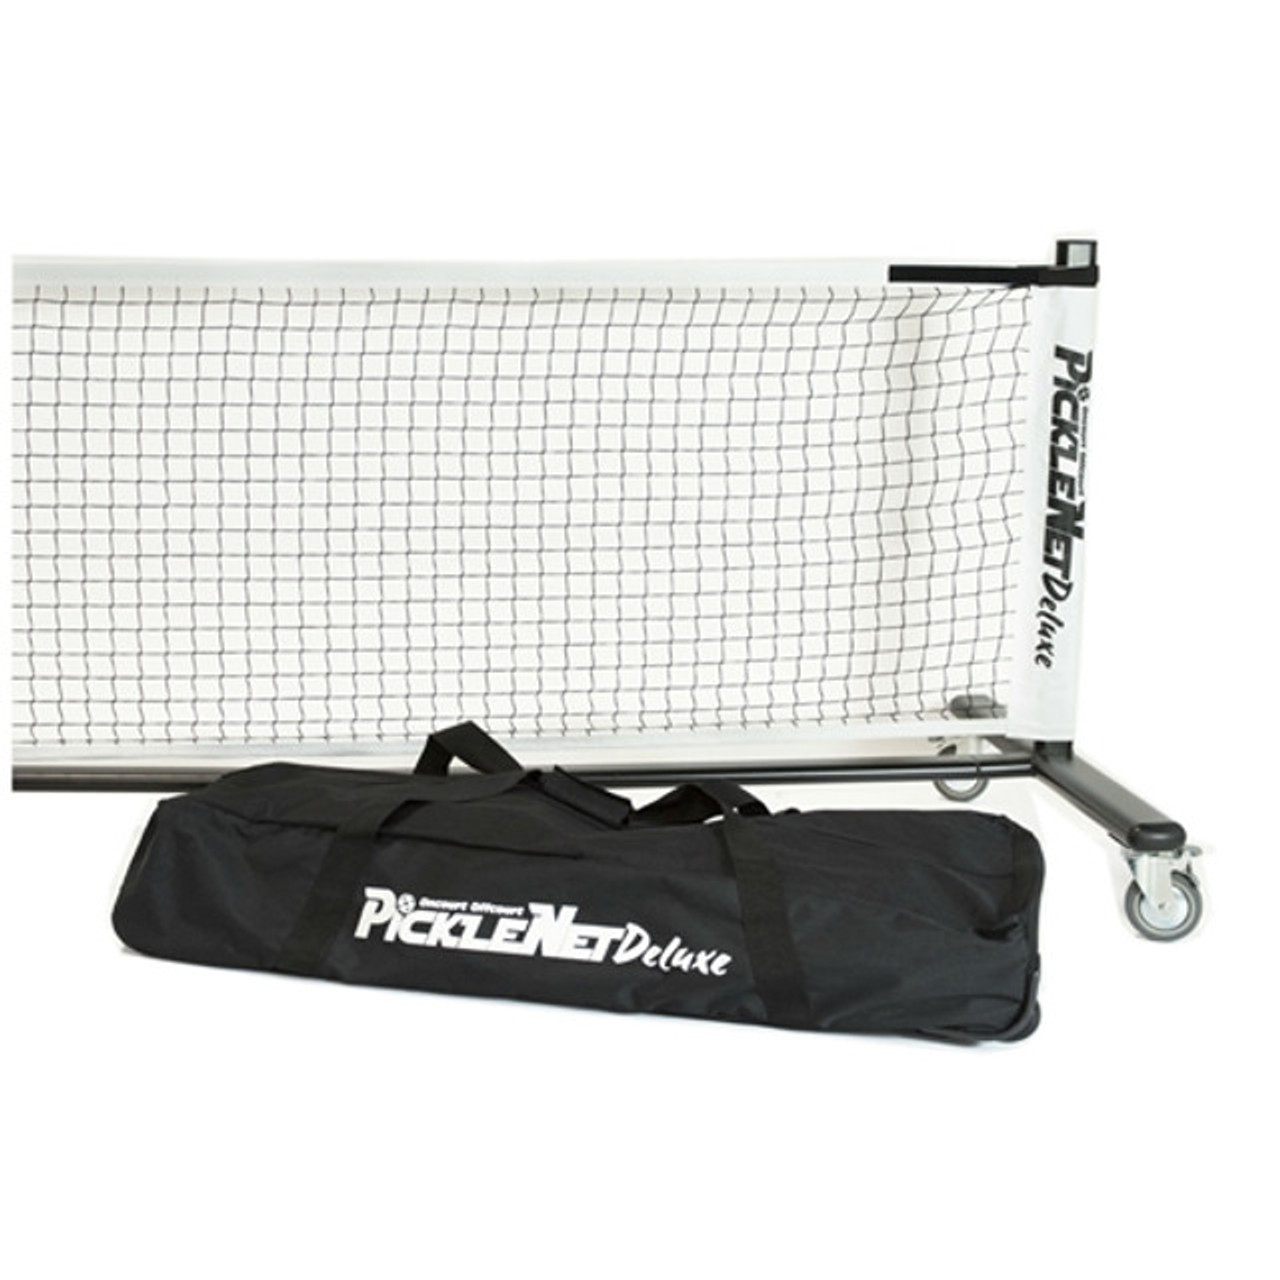 Deluxe PickleNet Portable Net - VolleyballUSA.com / United Volleyball ...